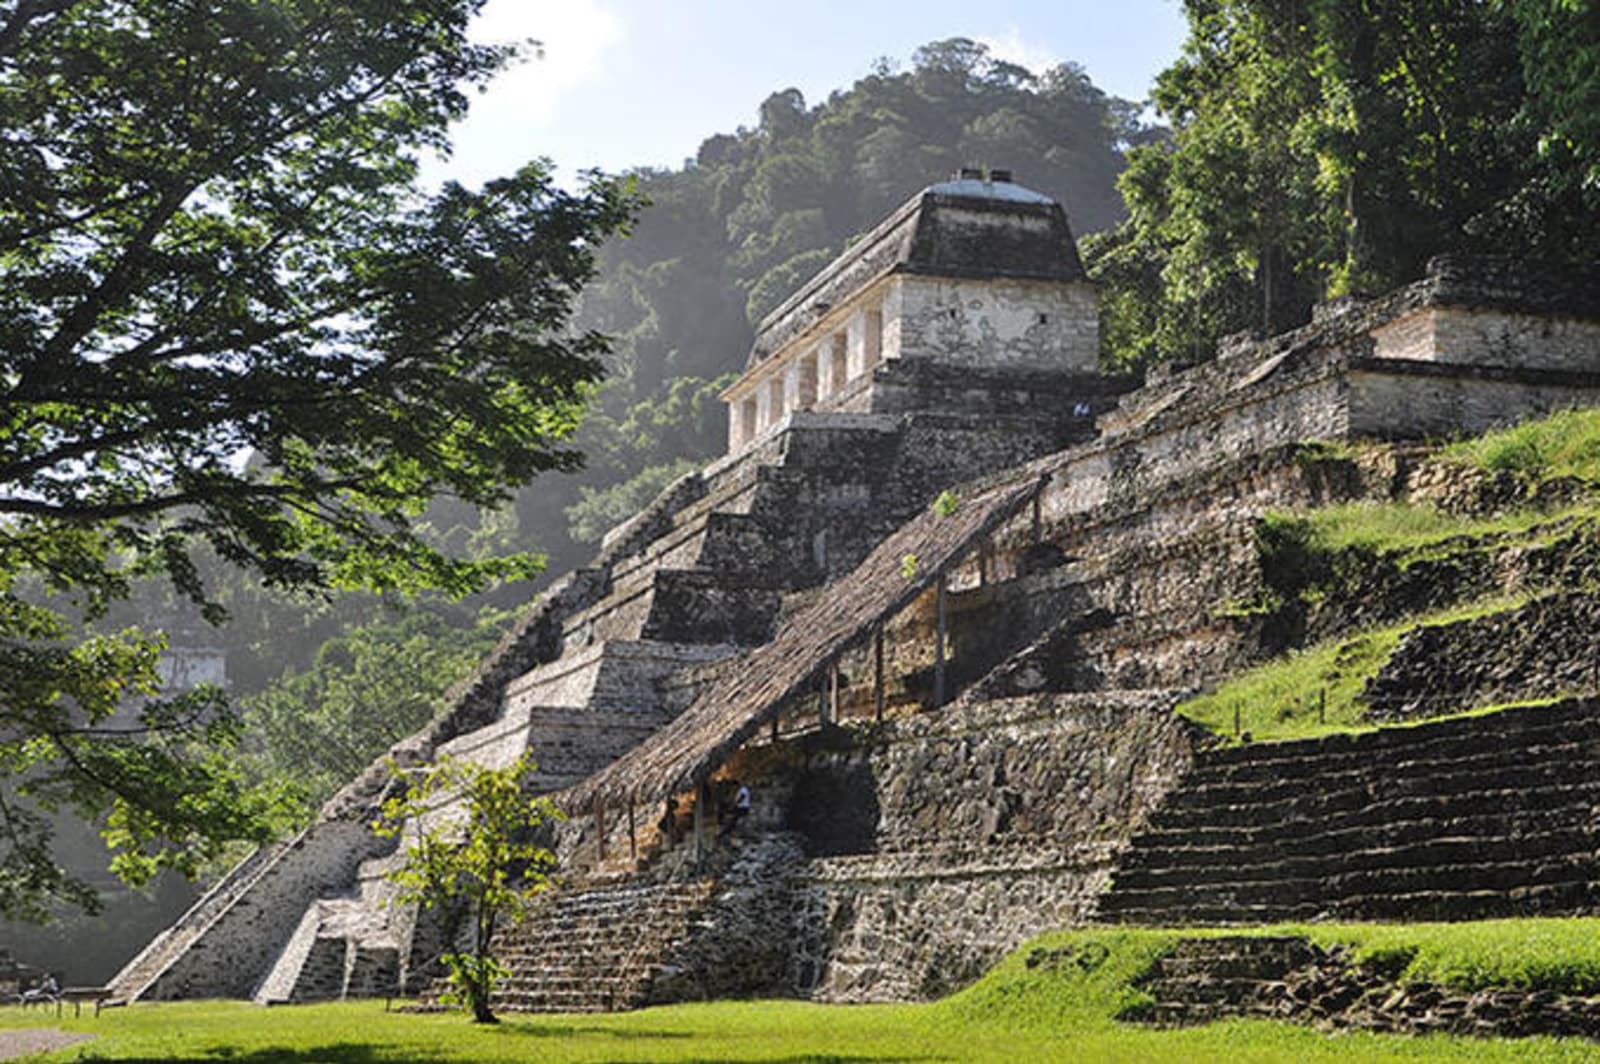 Palenque - a series of ancient temples and palaces of Mayan build